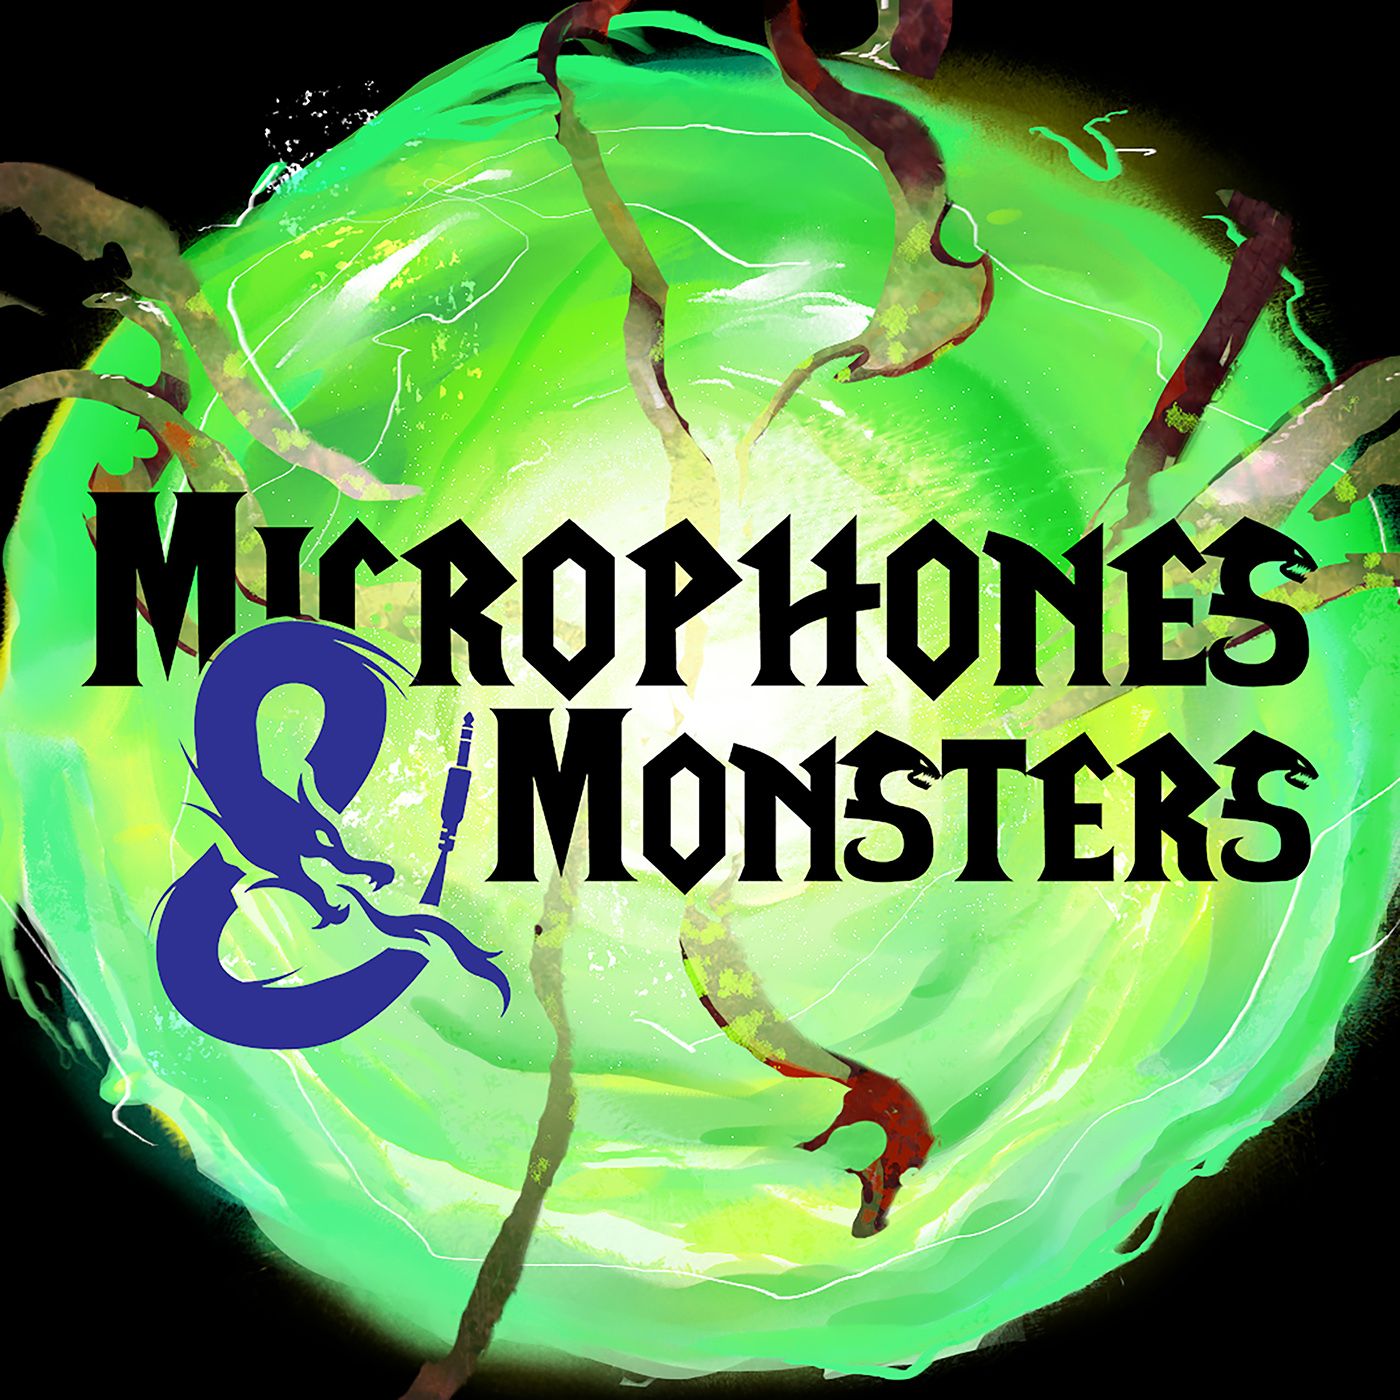 Microphones & Monsters: DnD Lovecraftian Horror podcast